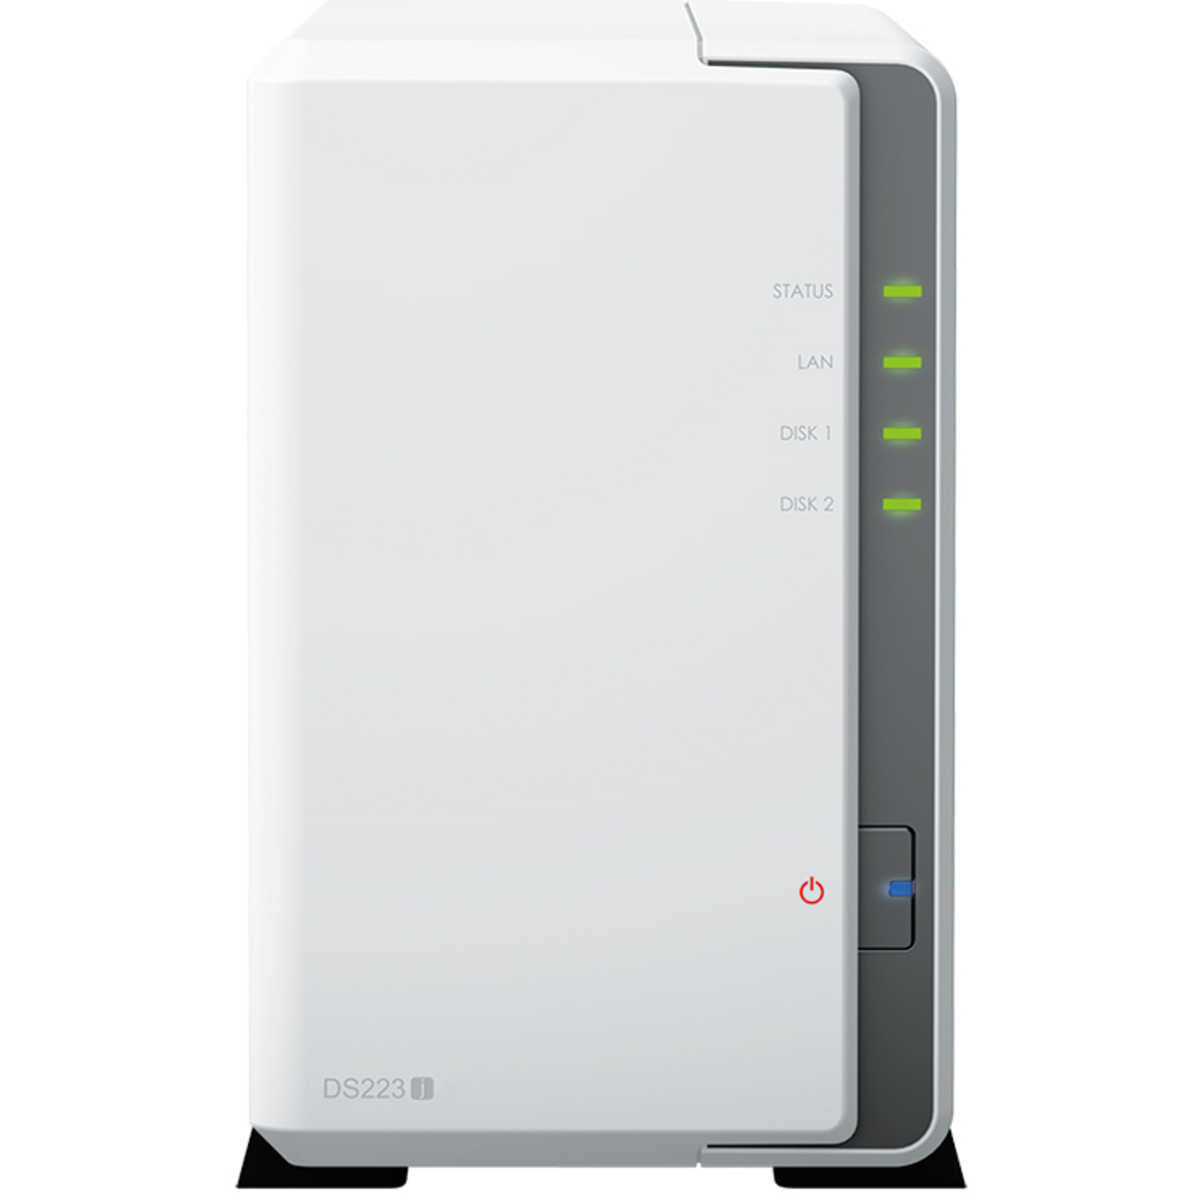 Synology DiskStation DS223j 8tb 2-Bay Desktop Personal / Basic Home / Small Office NAS - Network Attached Storage Device 2x4tb Western Digital Ultrastar DC HC310 HUS726T4TALE6L4 3.5 7200rpm SATA 6Gb/s HDD ENTERPRISE Class Drives Installed - Burn-In Tested DiskStation DS223j